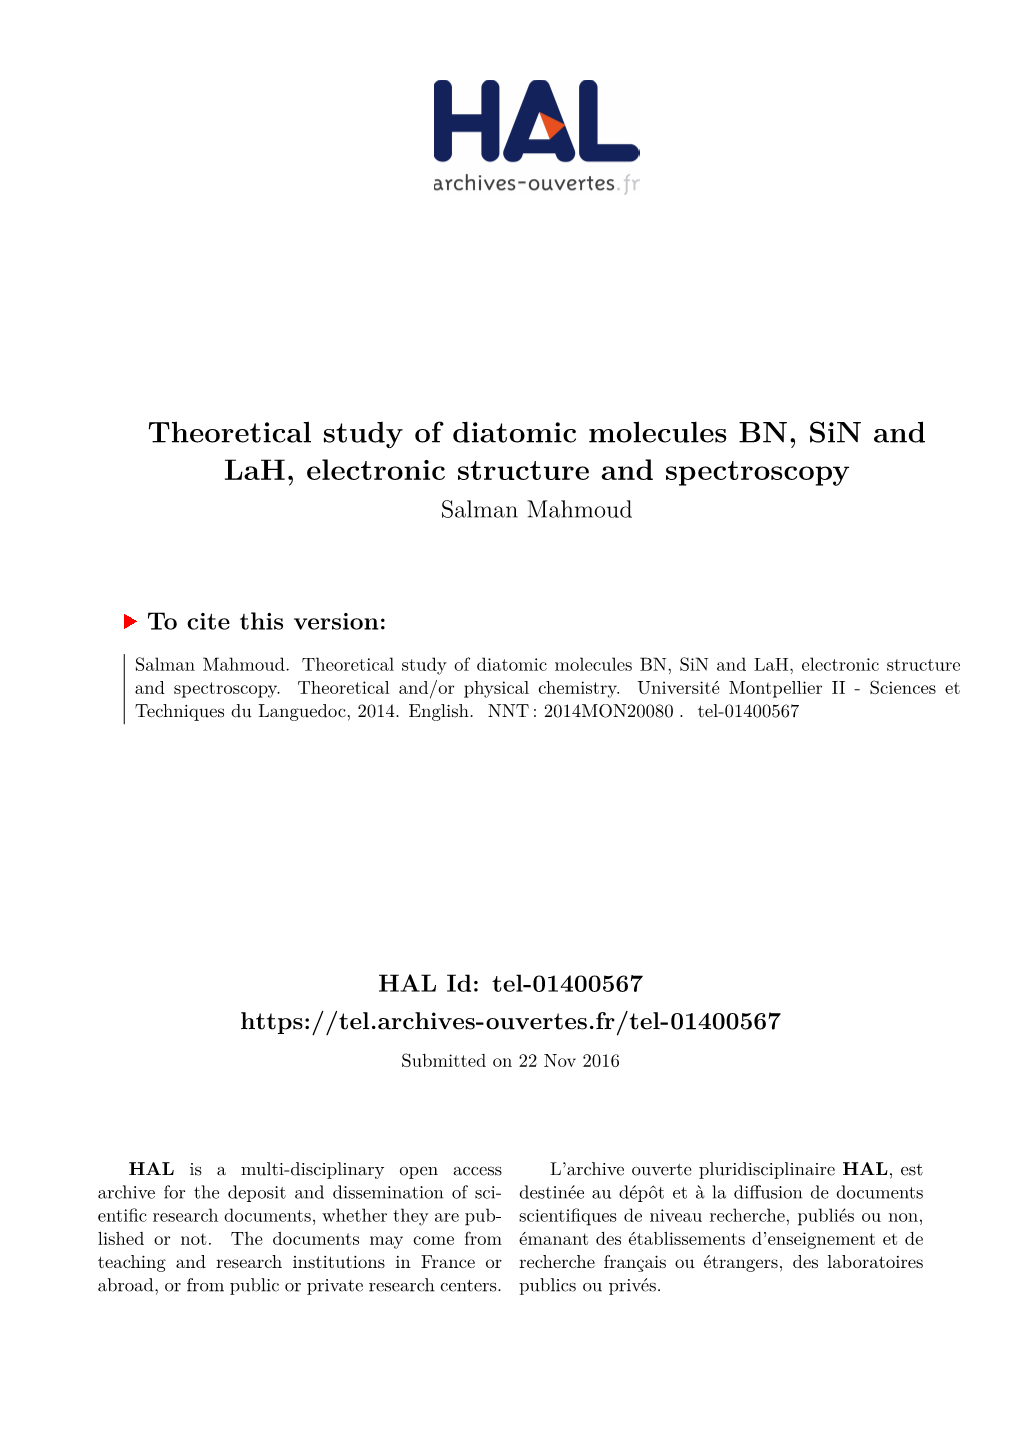 Theoretical Study of Diatomic Molecules BN, Sin and Lah, Electronic Structure and Spectroscopy Salman Mahmoud